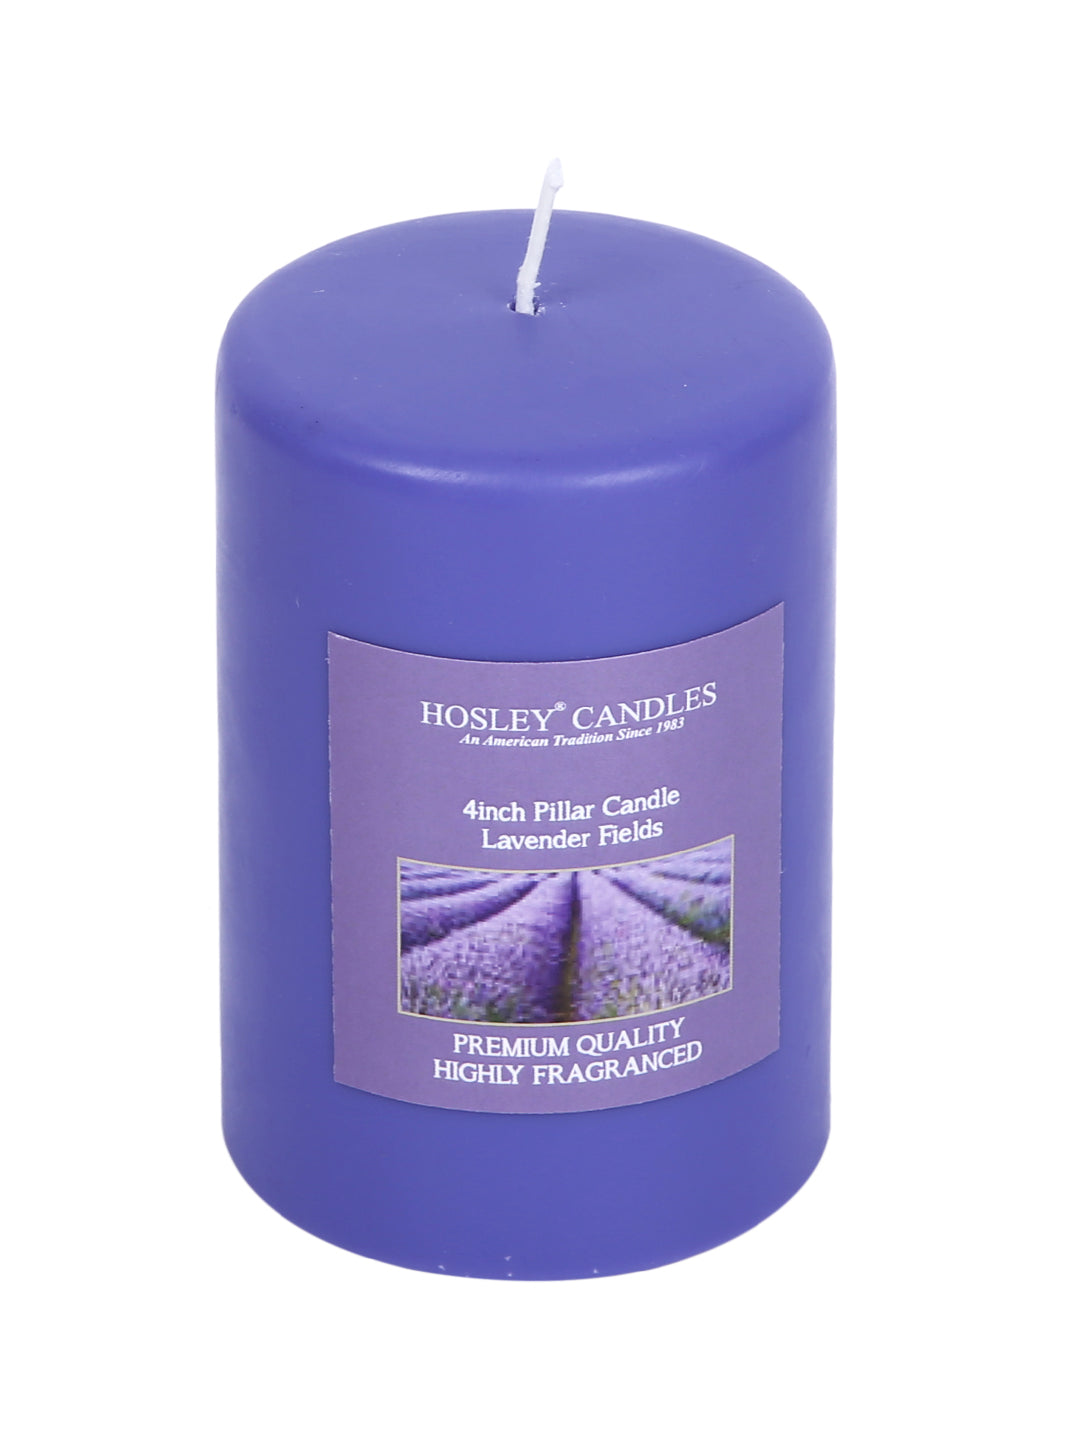 Hosley® Lavender Fields Highly Fragranced 4inch Pillar Candle